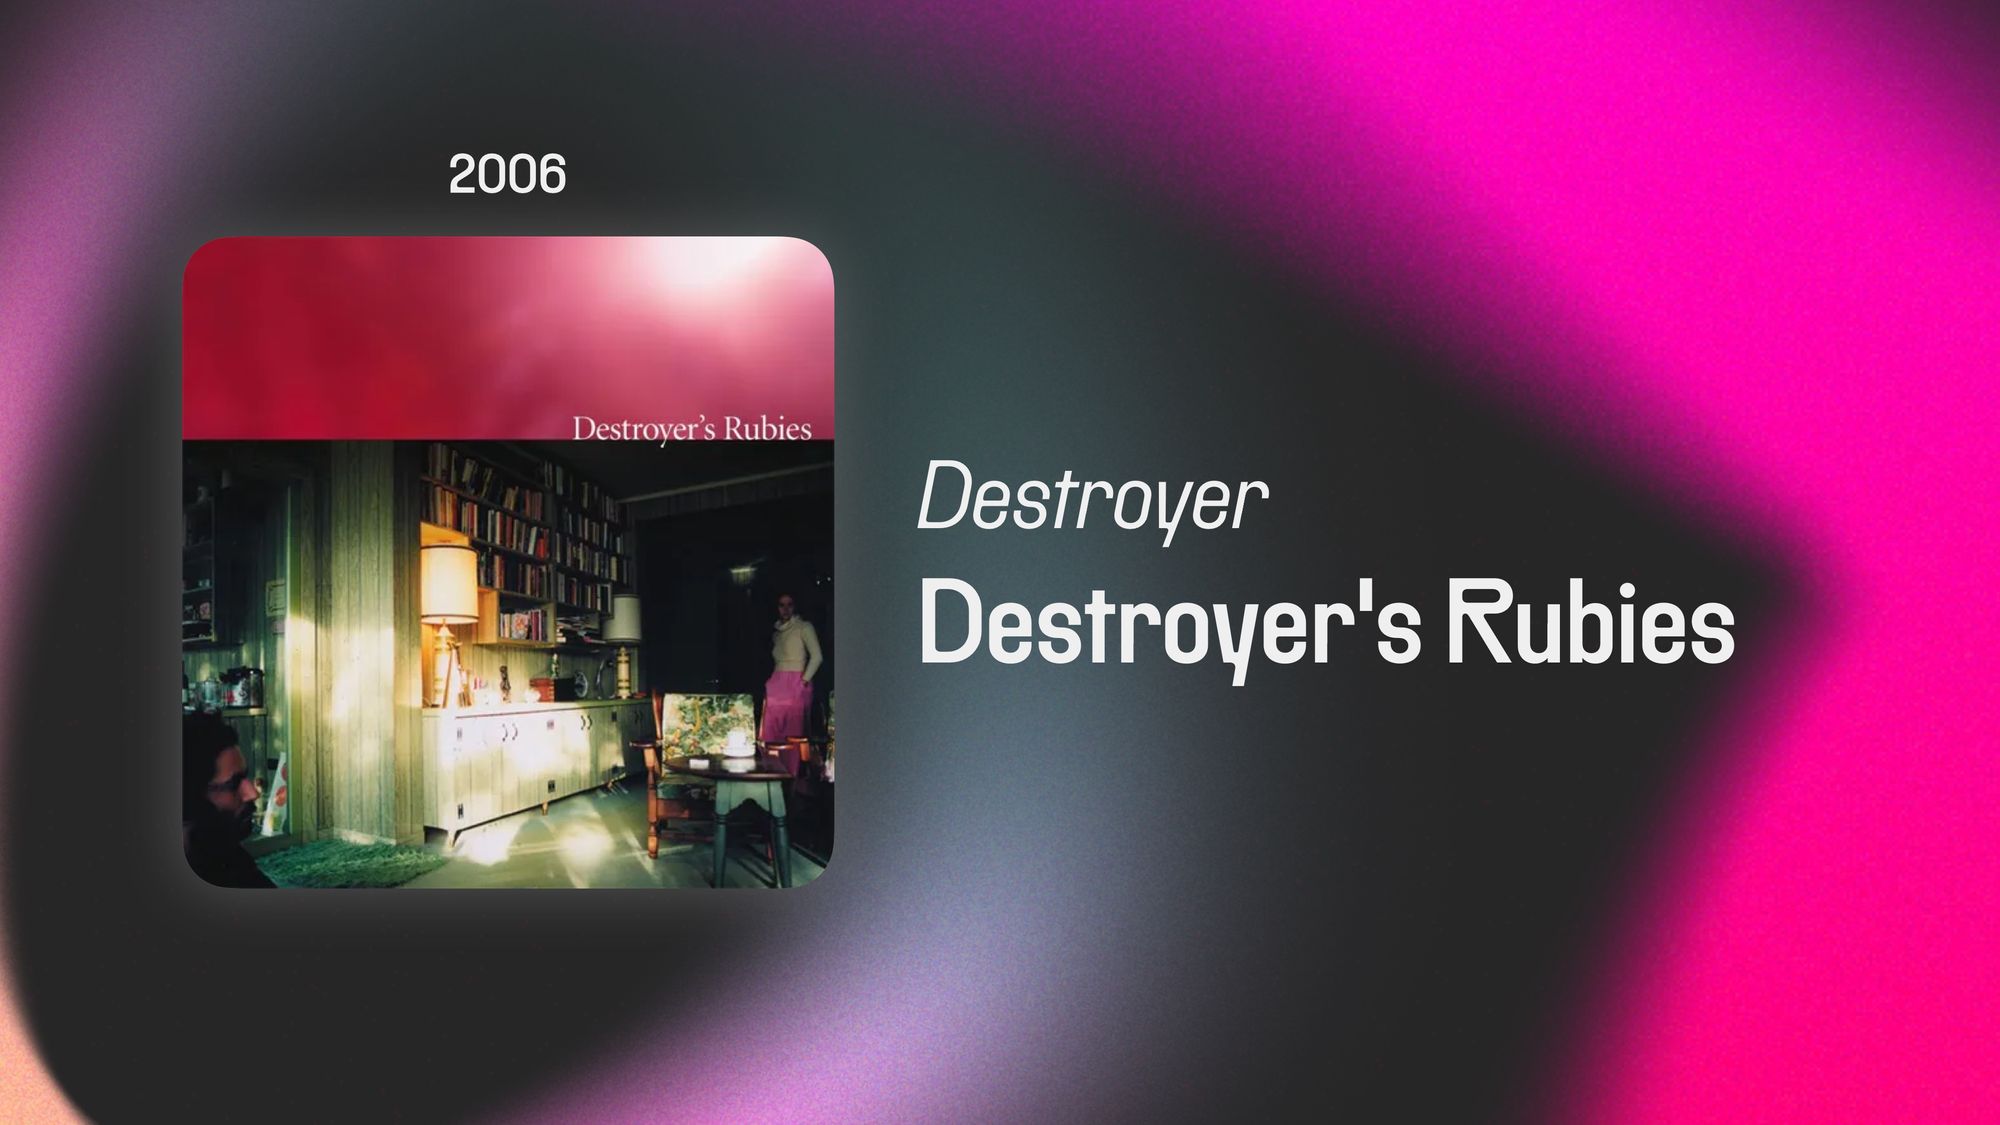 Destroyer’s Rubies (365 Albums)